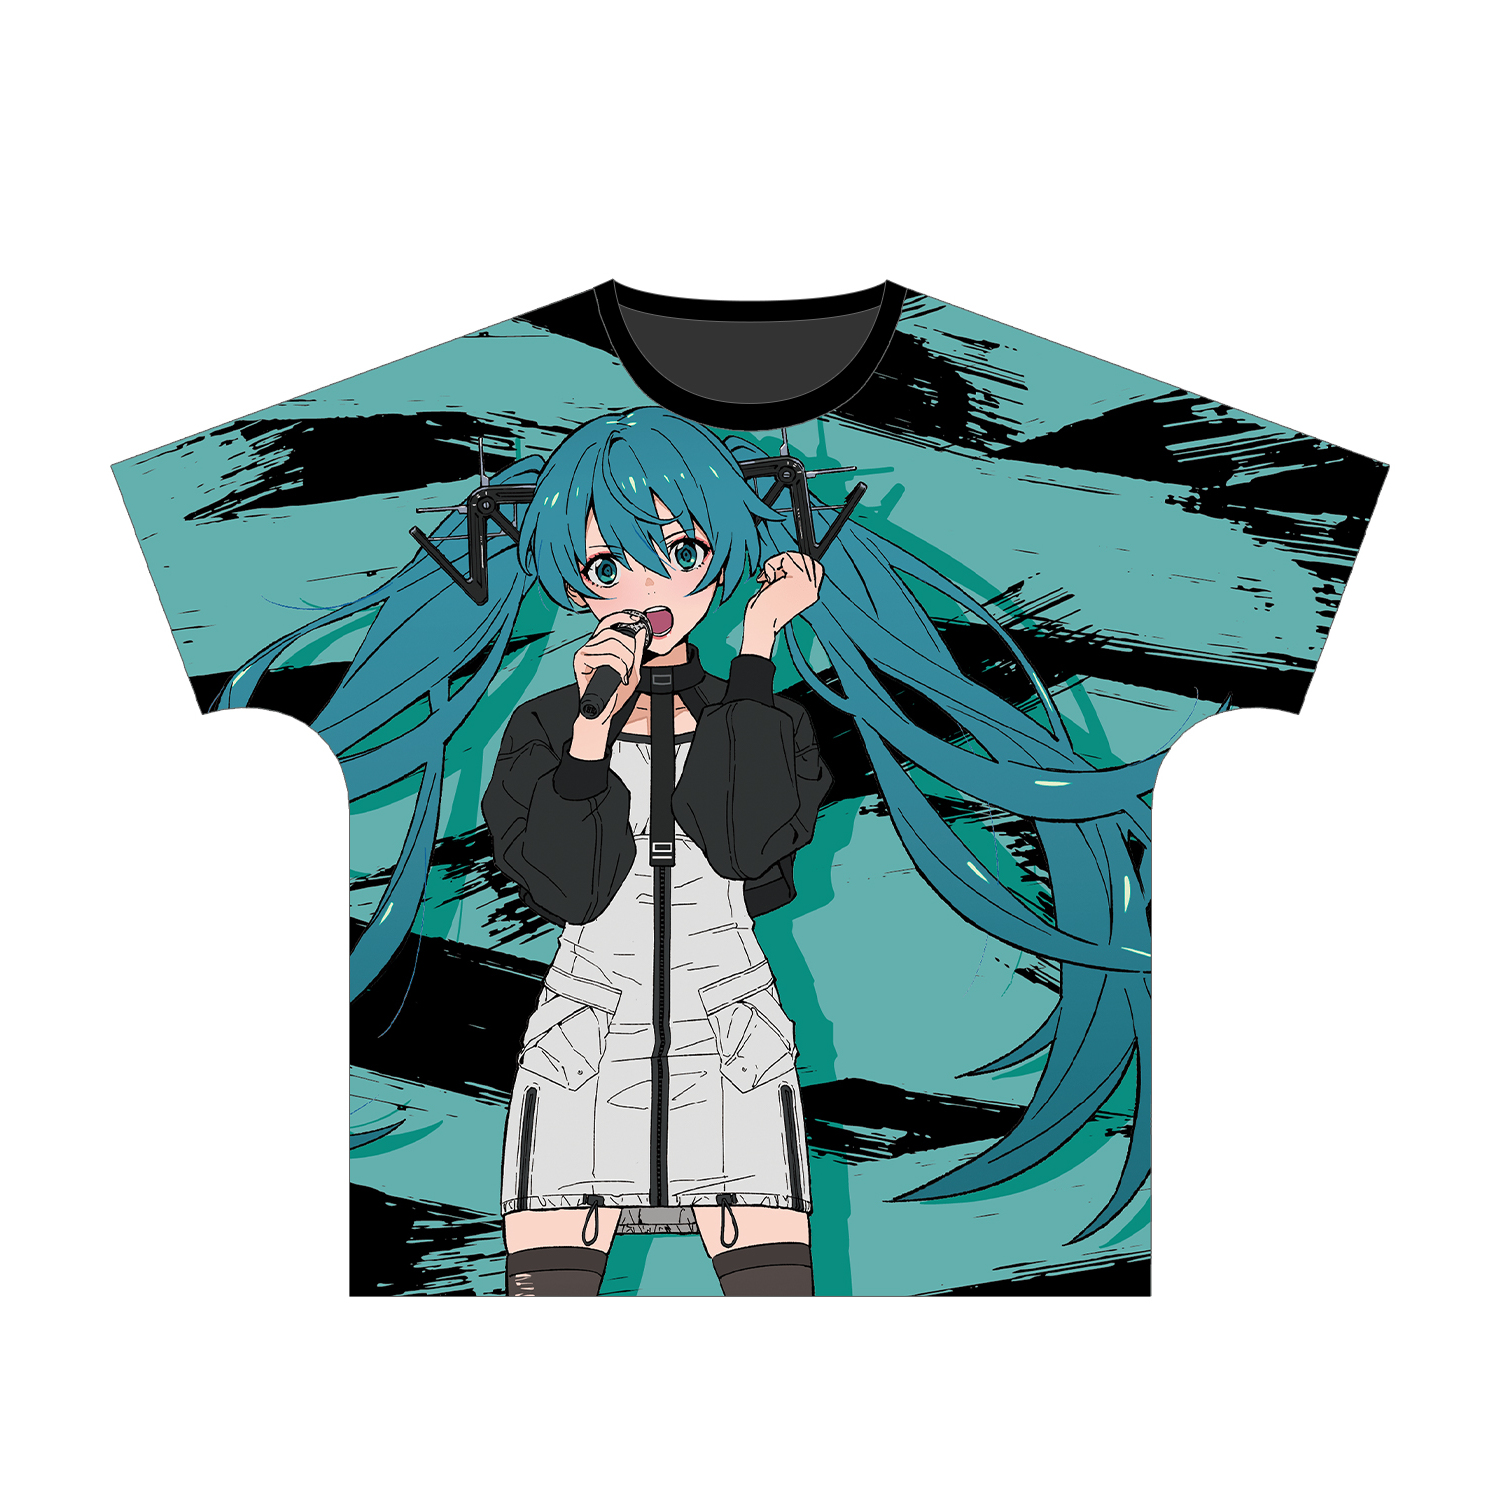 [Pre-Order] Piapro Characters Hatsune Miku Band ver. by tarou2 Full Graphic T-shirt Unisex Size – L